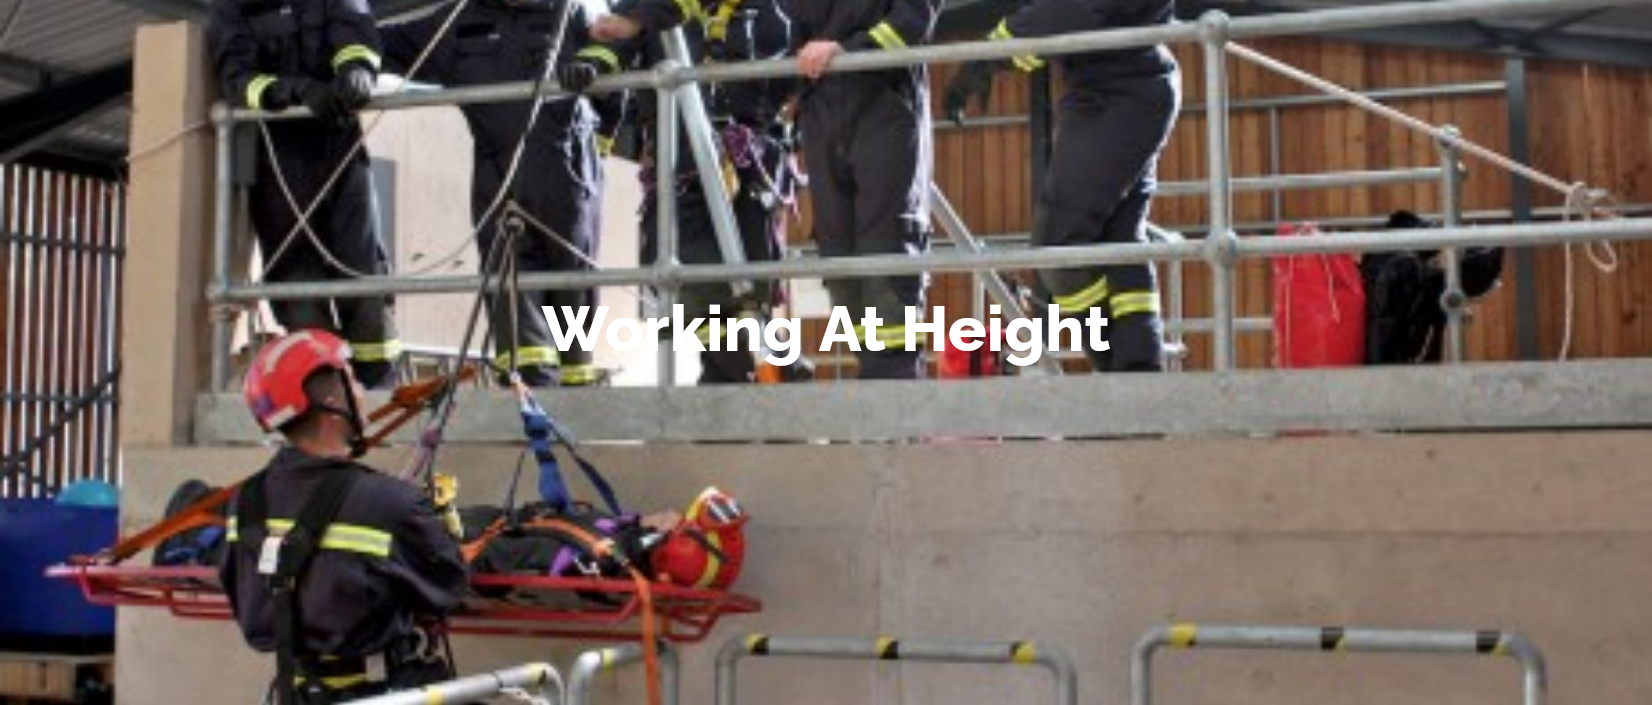 Working At Height Rescue Services